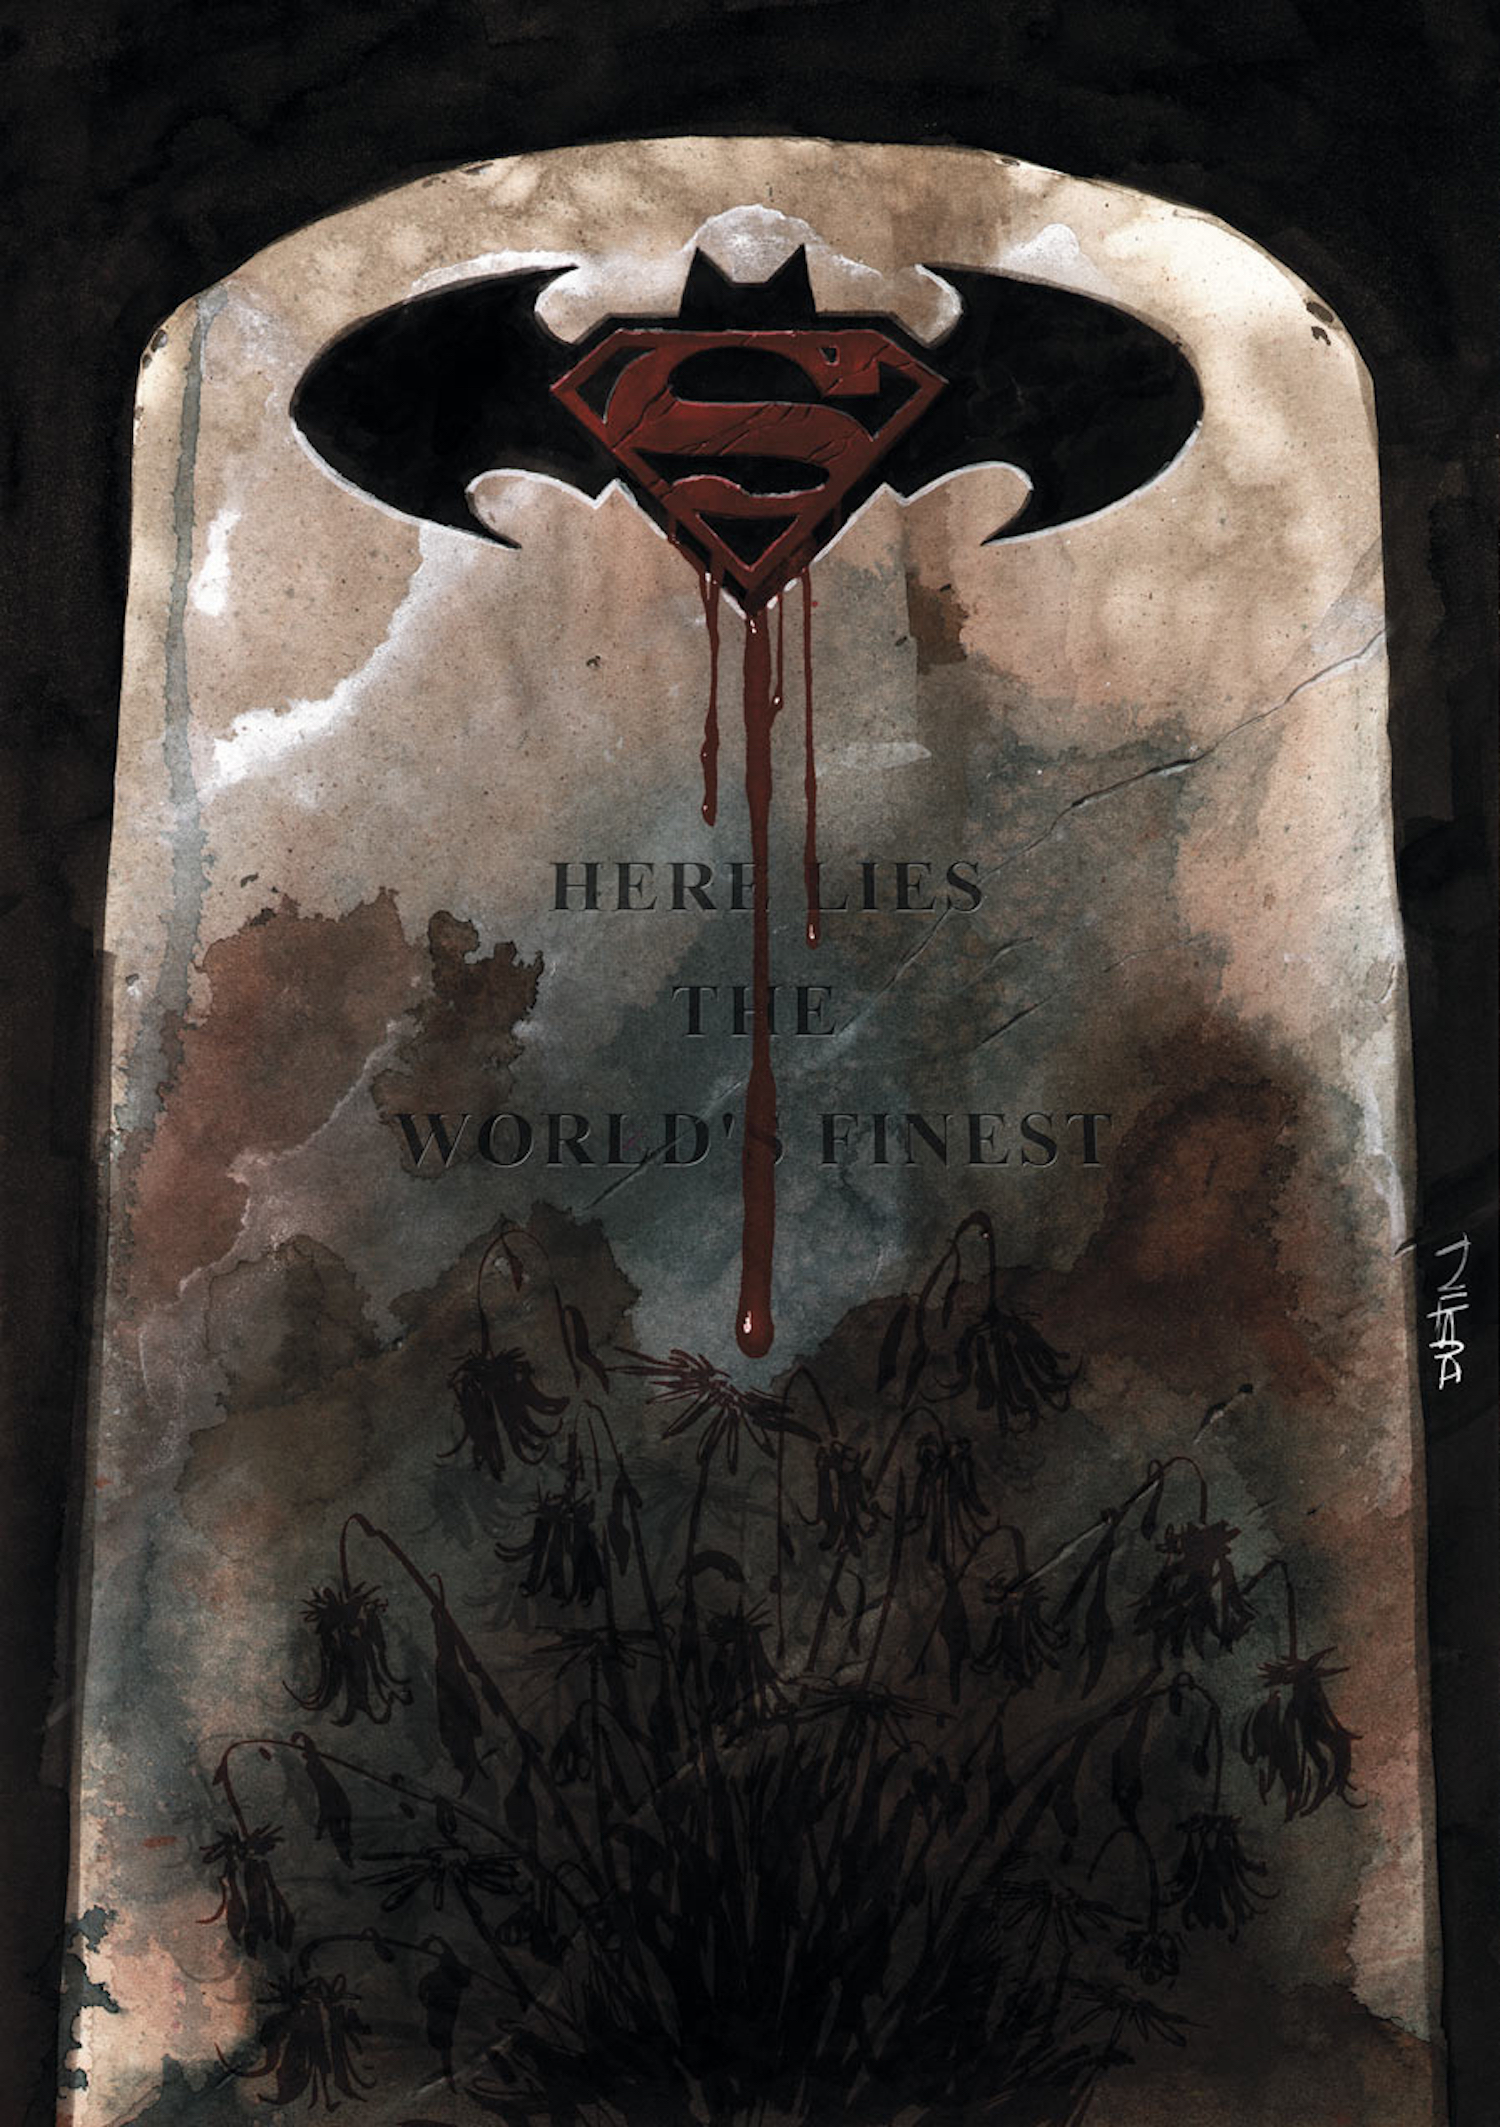 This image is the cover of Superman/Batman Vol 1 #65 (2009), showcasing an illustration of Batman and Superman's joint headstone. 